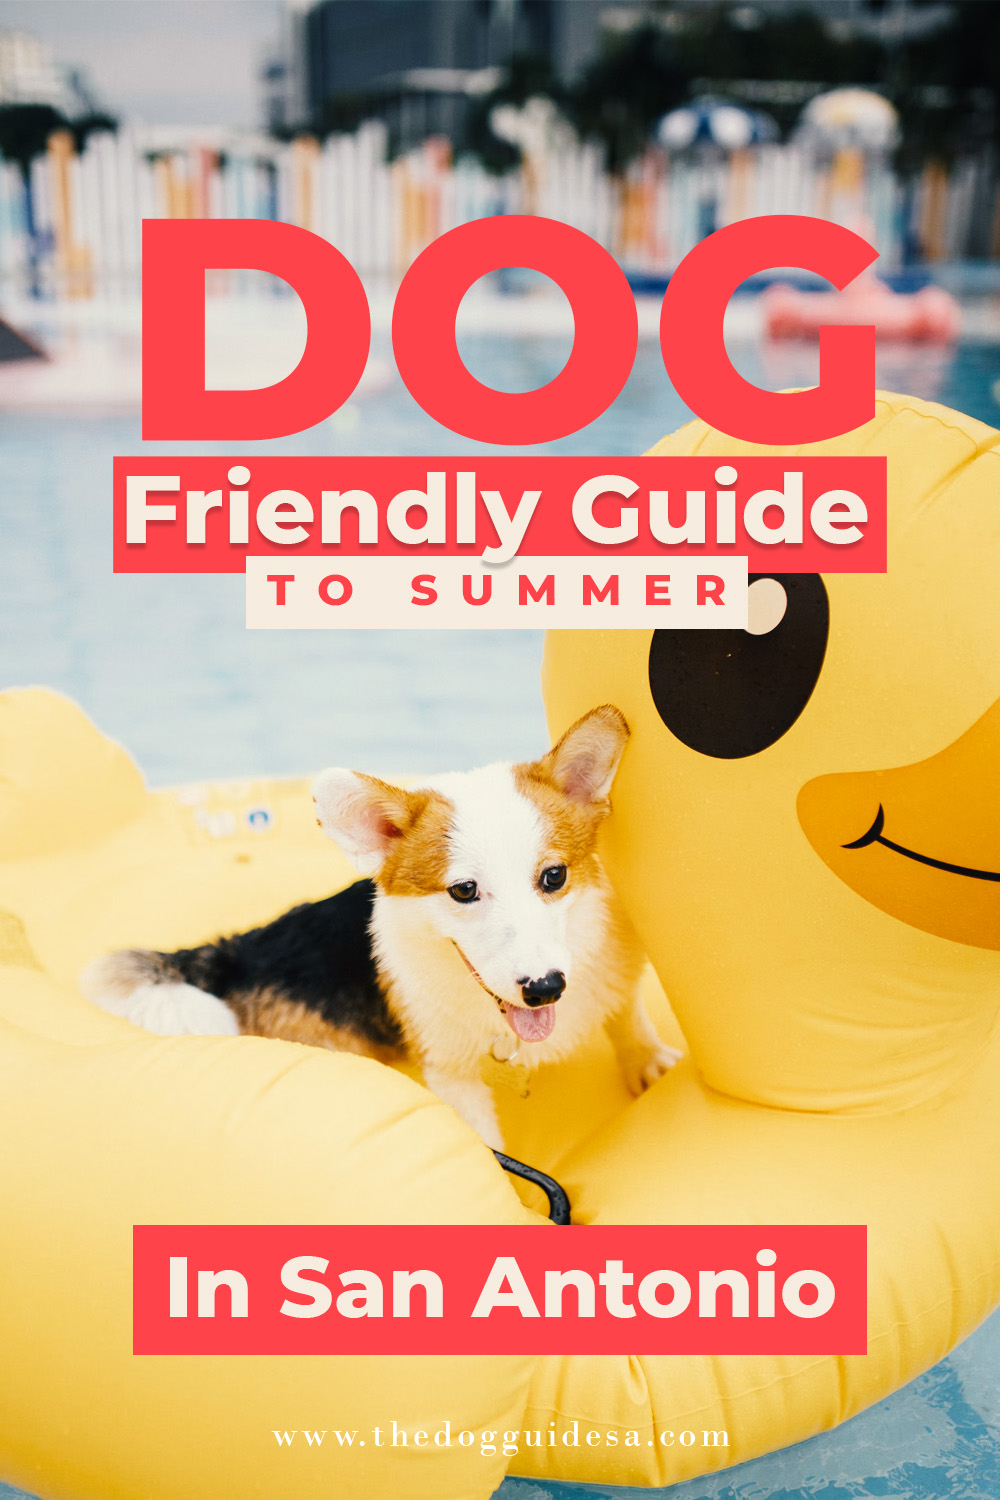 Fun in the sun: 11 great summer activities to do with your dog – DOG by Dr  Lisa